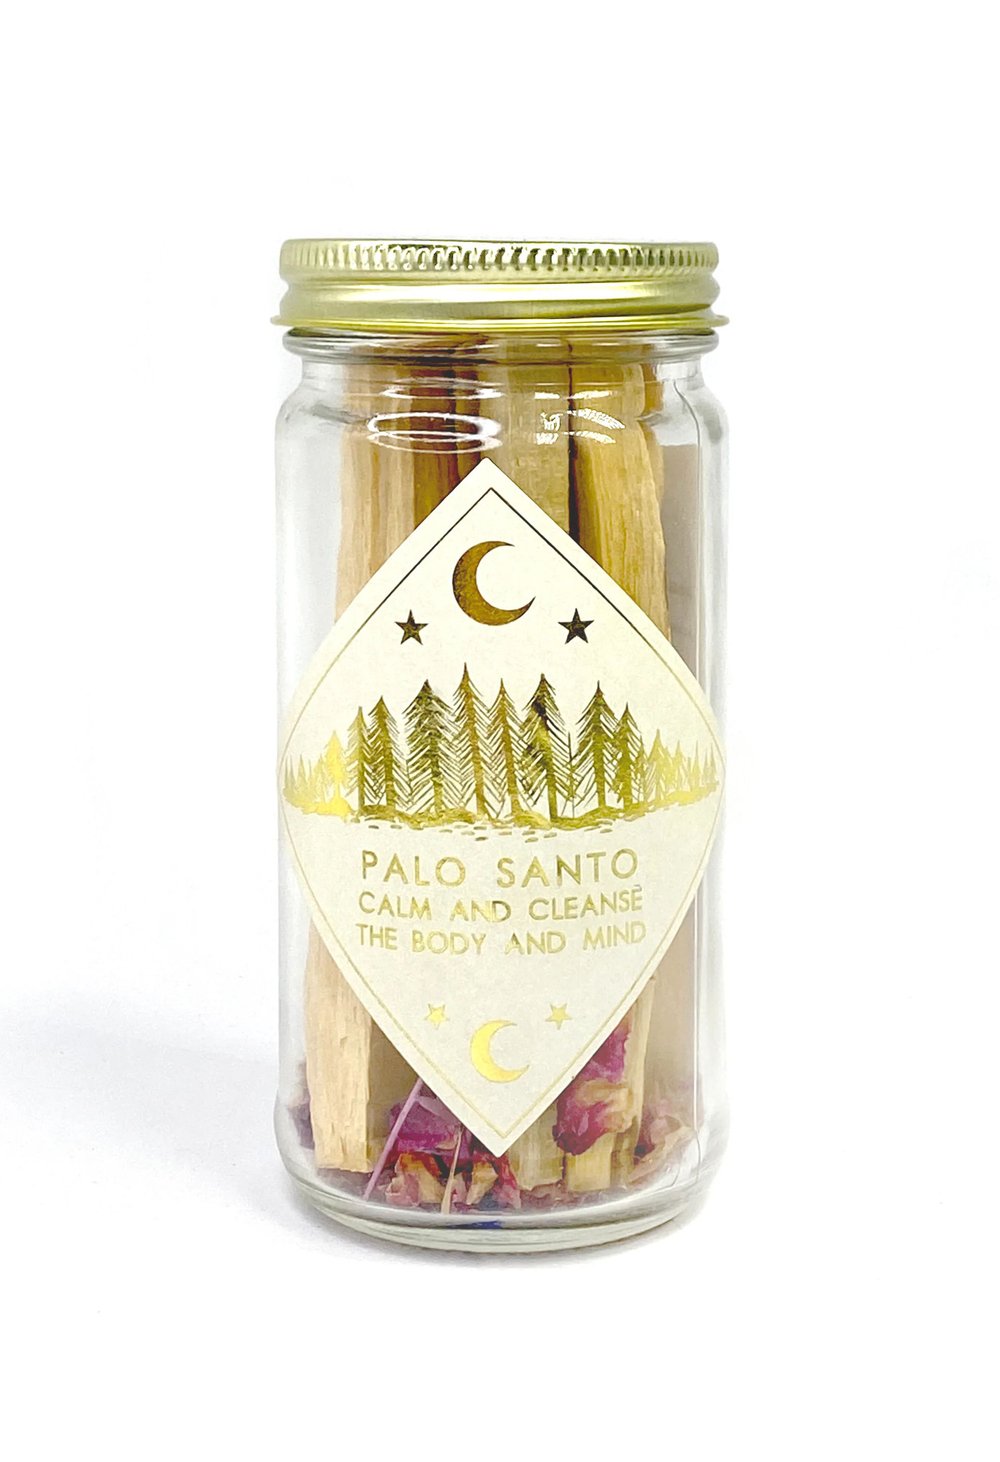 Palo Santo Kit — Lost Objects, Found Treasures